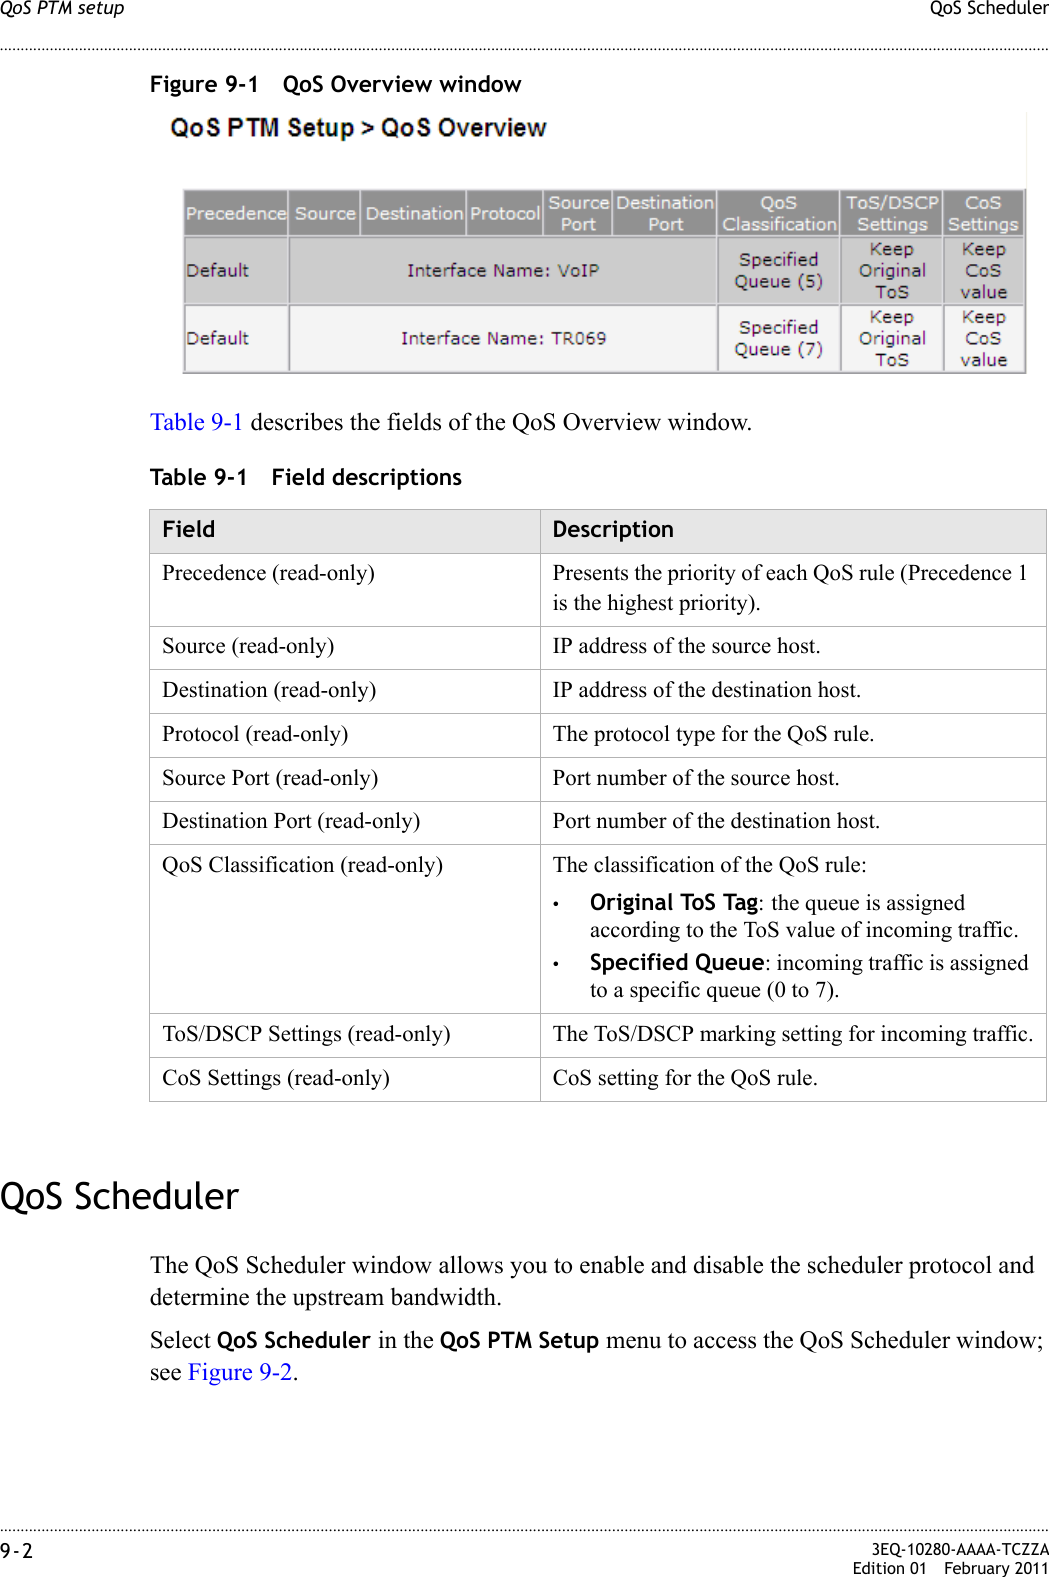 ............................................................................................................................................................................................................................................................QoS SchedulerQoS PTM setup9-2  3EQ-10280-AAAA-TCZZAEdition 01 February 2011............................................................................................................................................................................................................................................................Figure 9-1 QoS Overview windowTable 9-1 describes the fields of the QoS Overview window.Table 9-1 Field descriptionsQoS SchedulerThe QoS Scheduler window allows you to enable and disable the scheduler protocol and determine the upstream bandwidth.Select QoS Scheduler in the QoS PTM Setup menu to access the QoS Scheduler window; see Figure 9-2.Field DescriptionPrecedence (read-only) Presents the priority of each QoS rule (Precedence 1 is the highest priority).Source (read-only) IP address of the source host.Destination (read-only) IP address of the destination host.Protocol (read-only) The protocol type for the QoS rule.Source Port (read-only) Port number of the source host.Destination Port (read-only) Port number of the destination host.QoS Classification (read-only) The classification of the QoS rule:•Original ToS Tag: the queue is assigned according to the ToS value of incoming traffic.•Specified Queue: incoming traffic is assigned to a specific queue (0 to 7).ToS/DSCP Settings (read-only) The ToS/DSCP marking setting for incoming traffic.CoS Settings (read-only) CoS setting for the QoS rule.